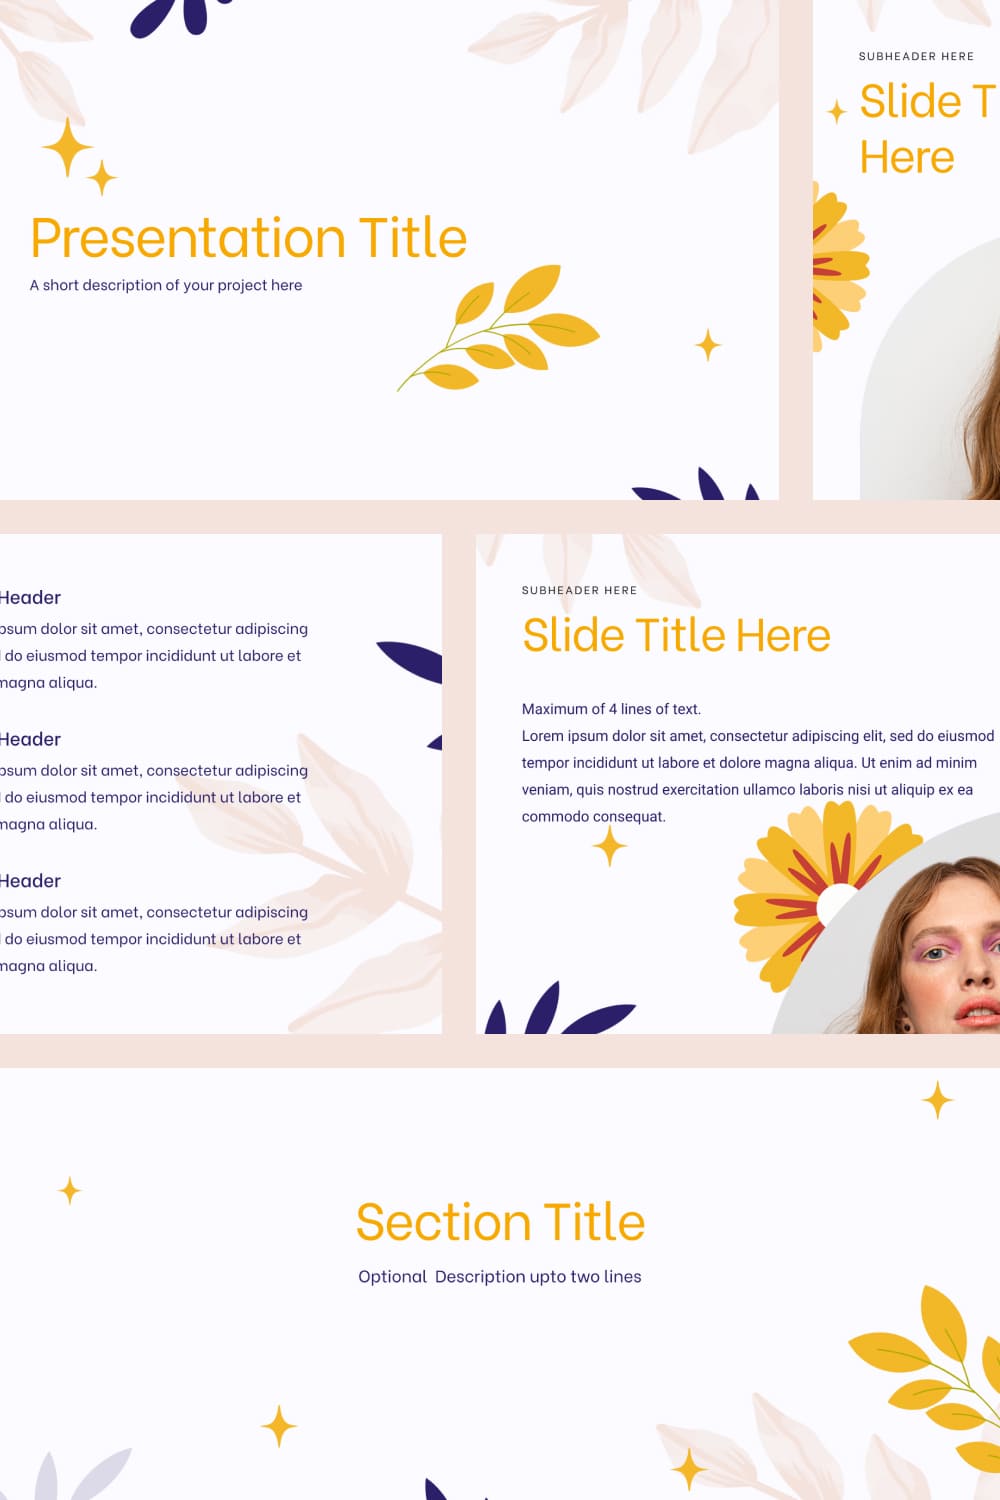 Pinterest of Spring Powerpoint Template.